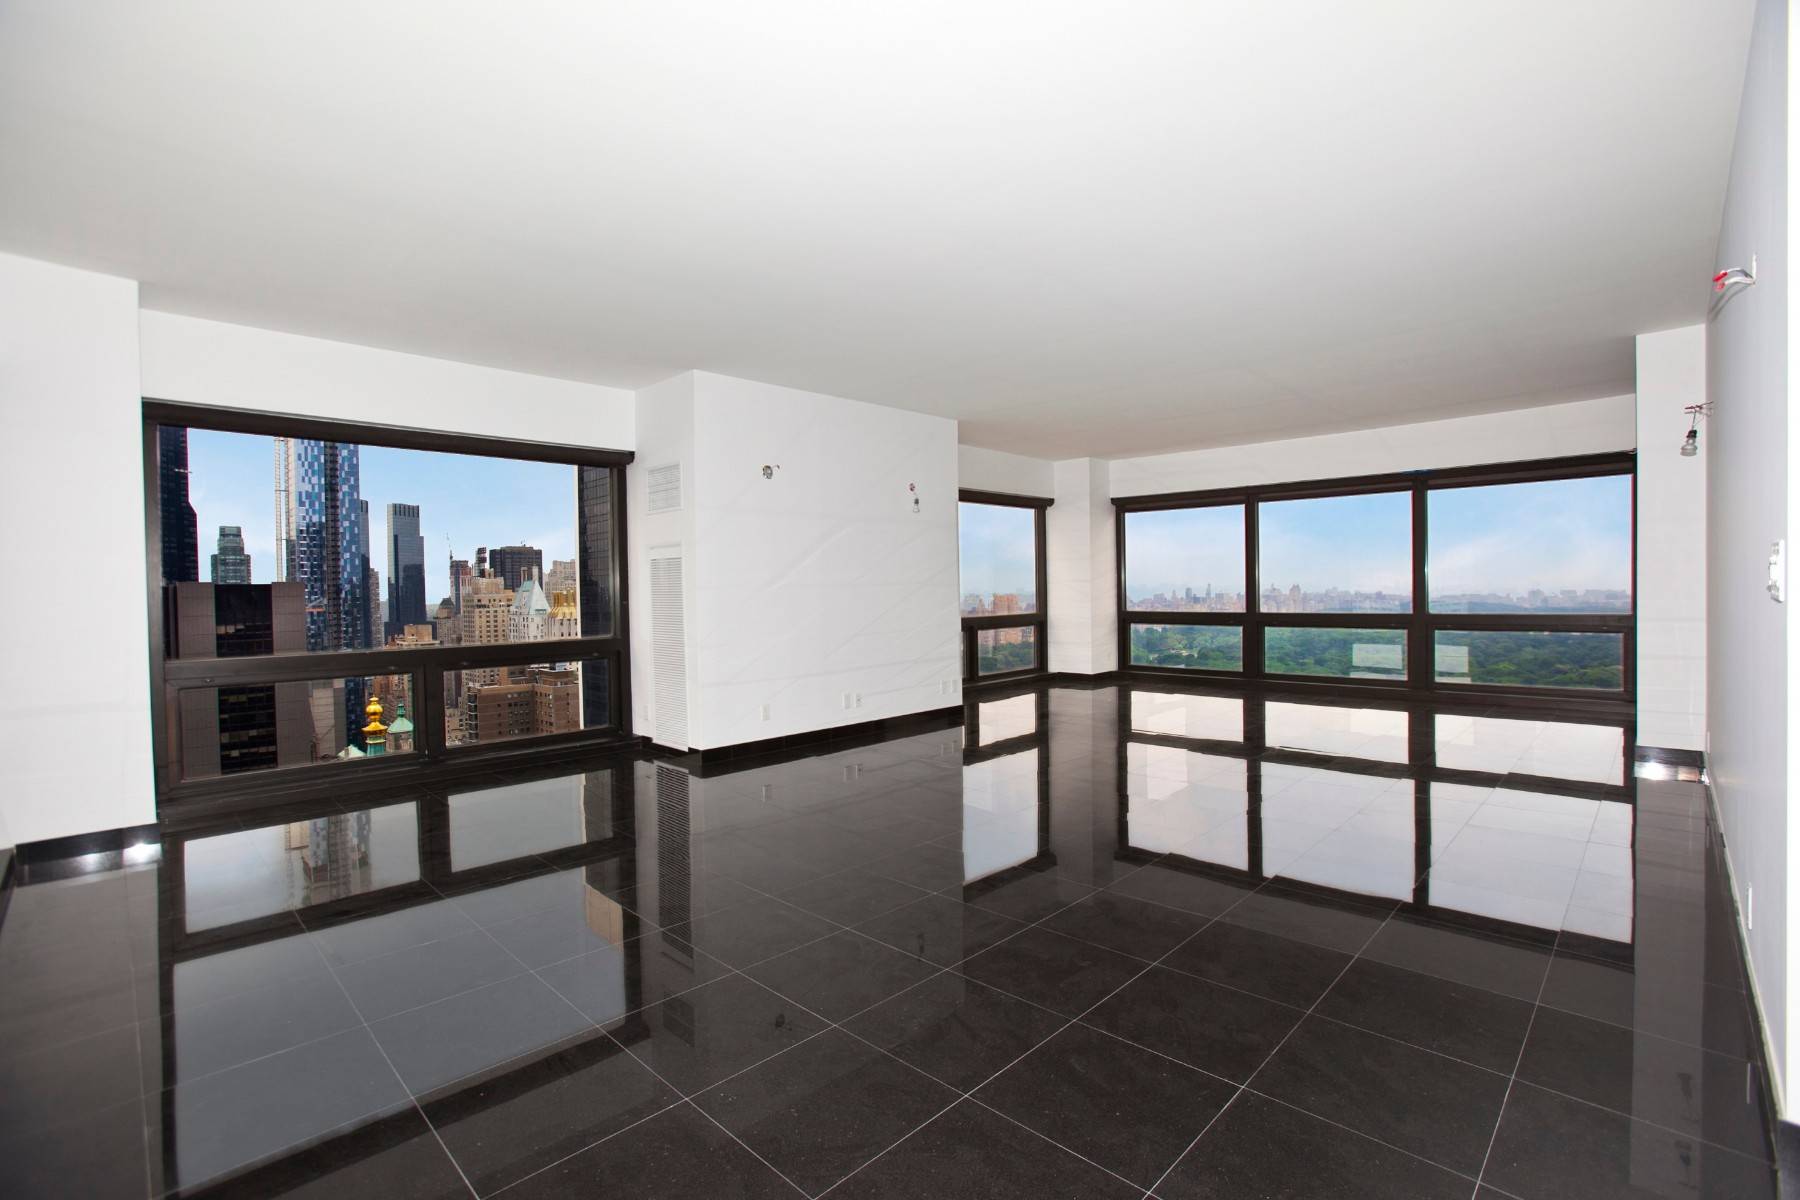 The rare and fabulous J line apartment in excellent condition with a new kitchen and granite floors in the premier corner of Trump Tower has come to the market.